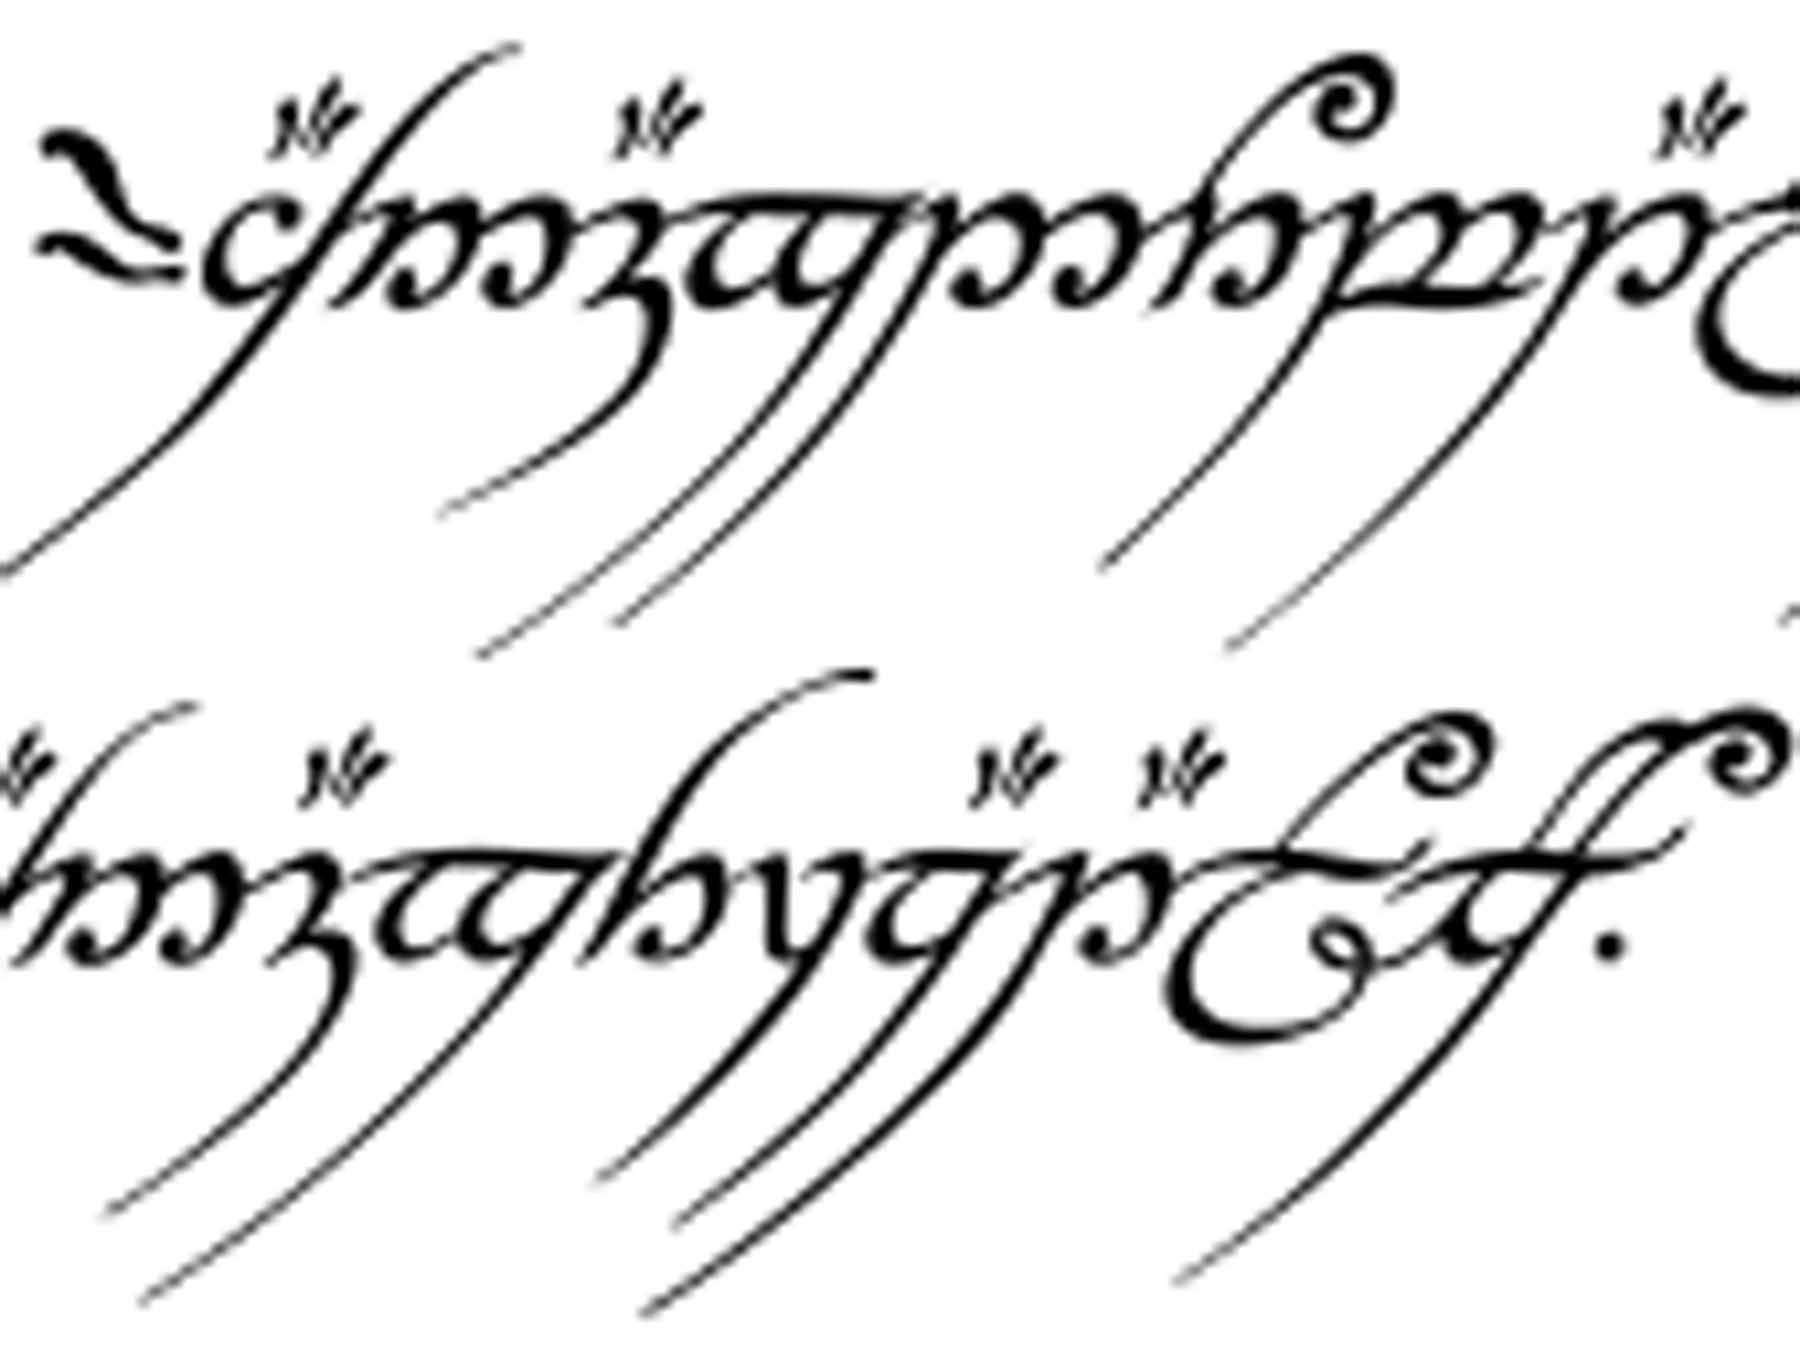 Inscription on the One Ring